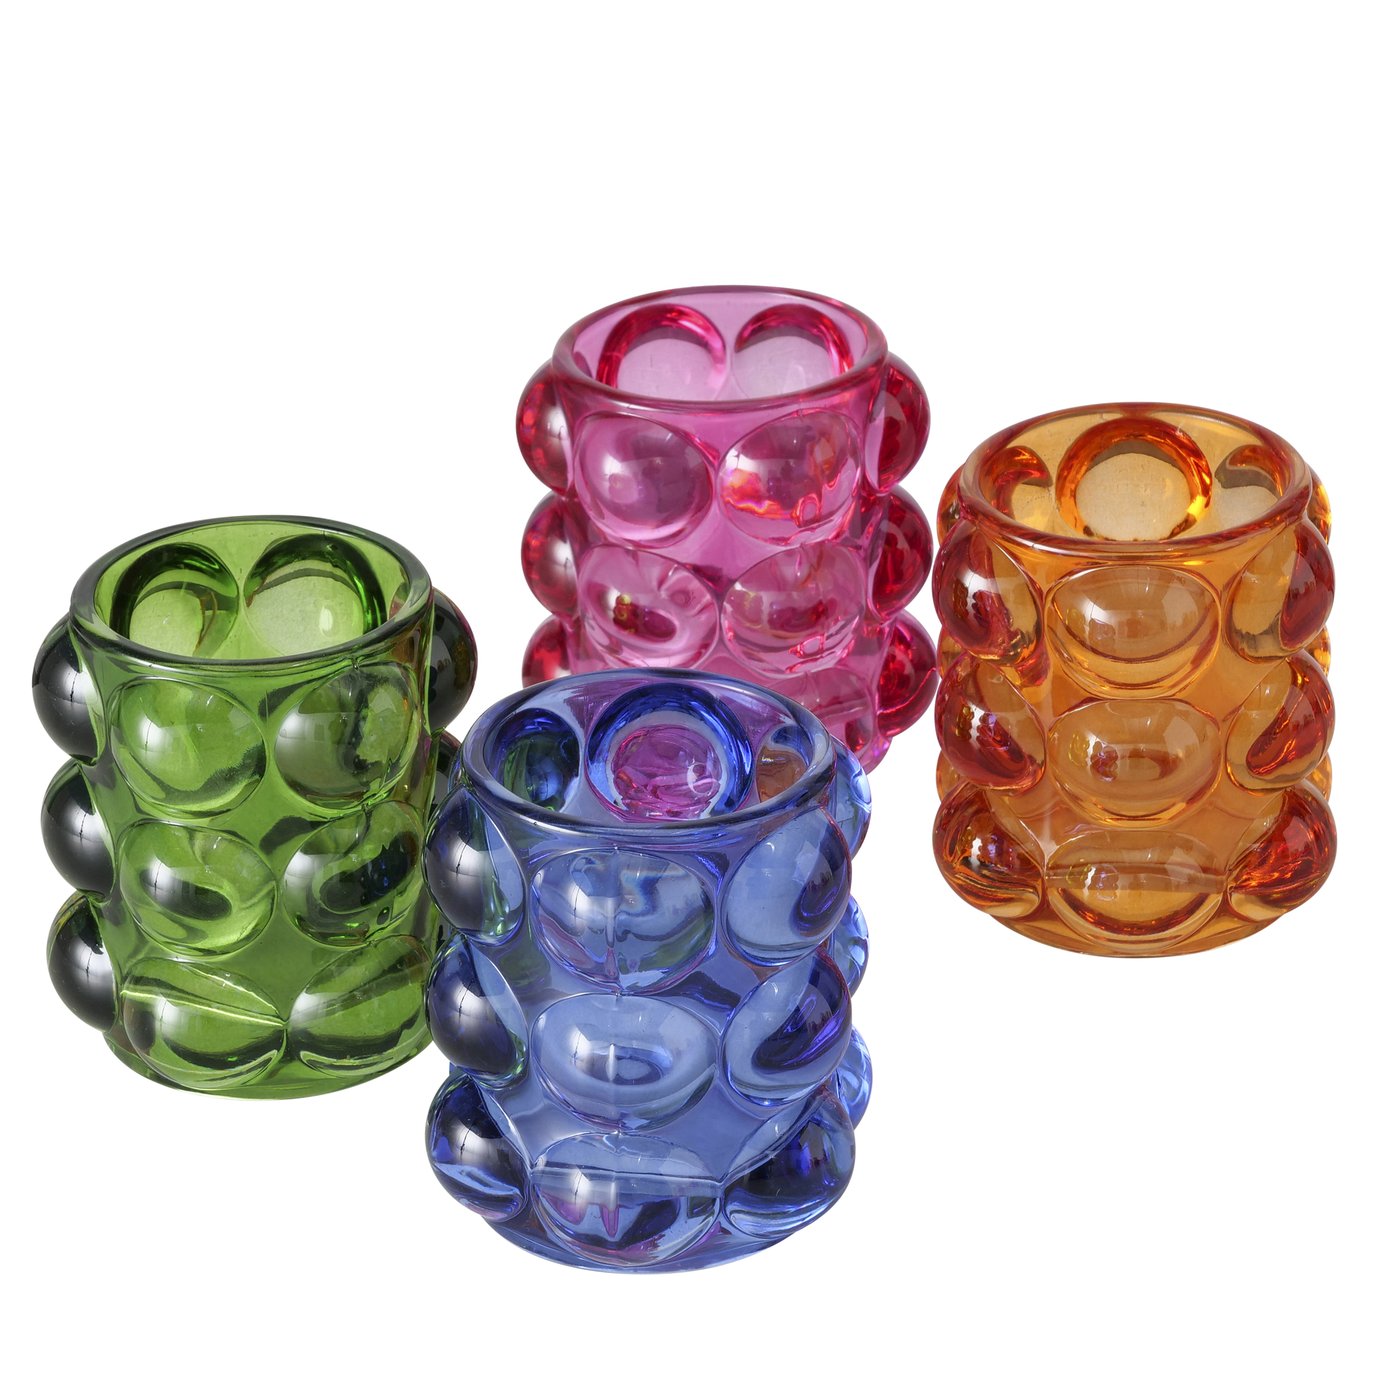 &Quirky Colour Pop Bubbles Glass Tealight Holder : Blue. Green, Orange or Pink